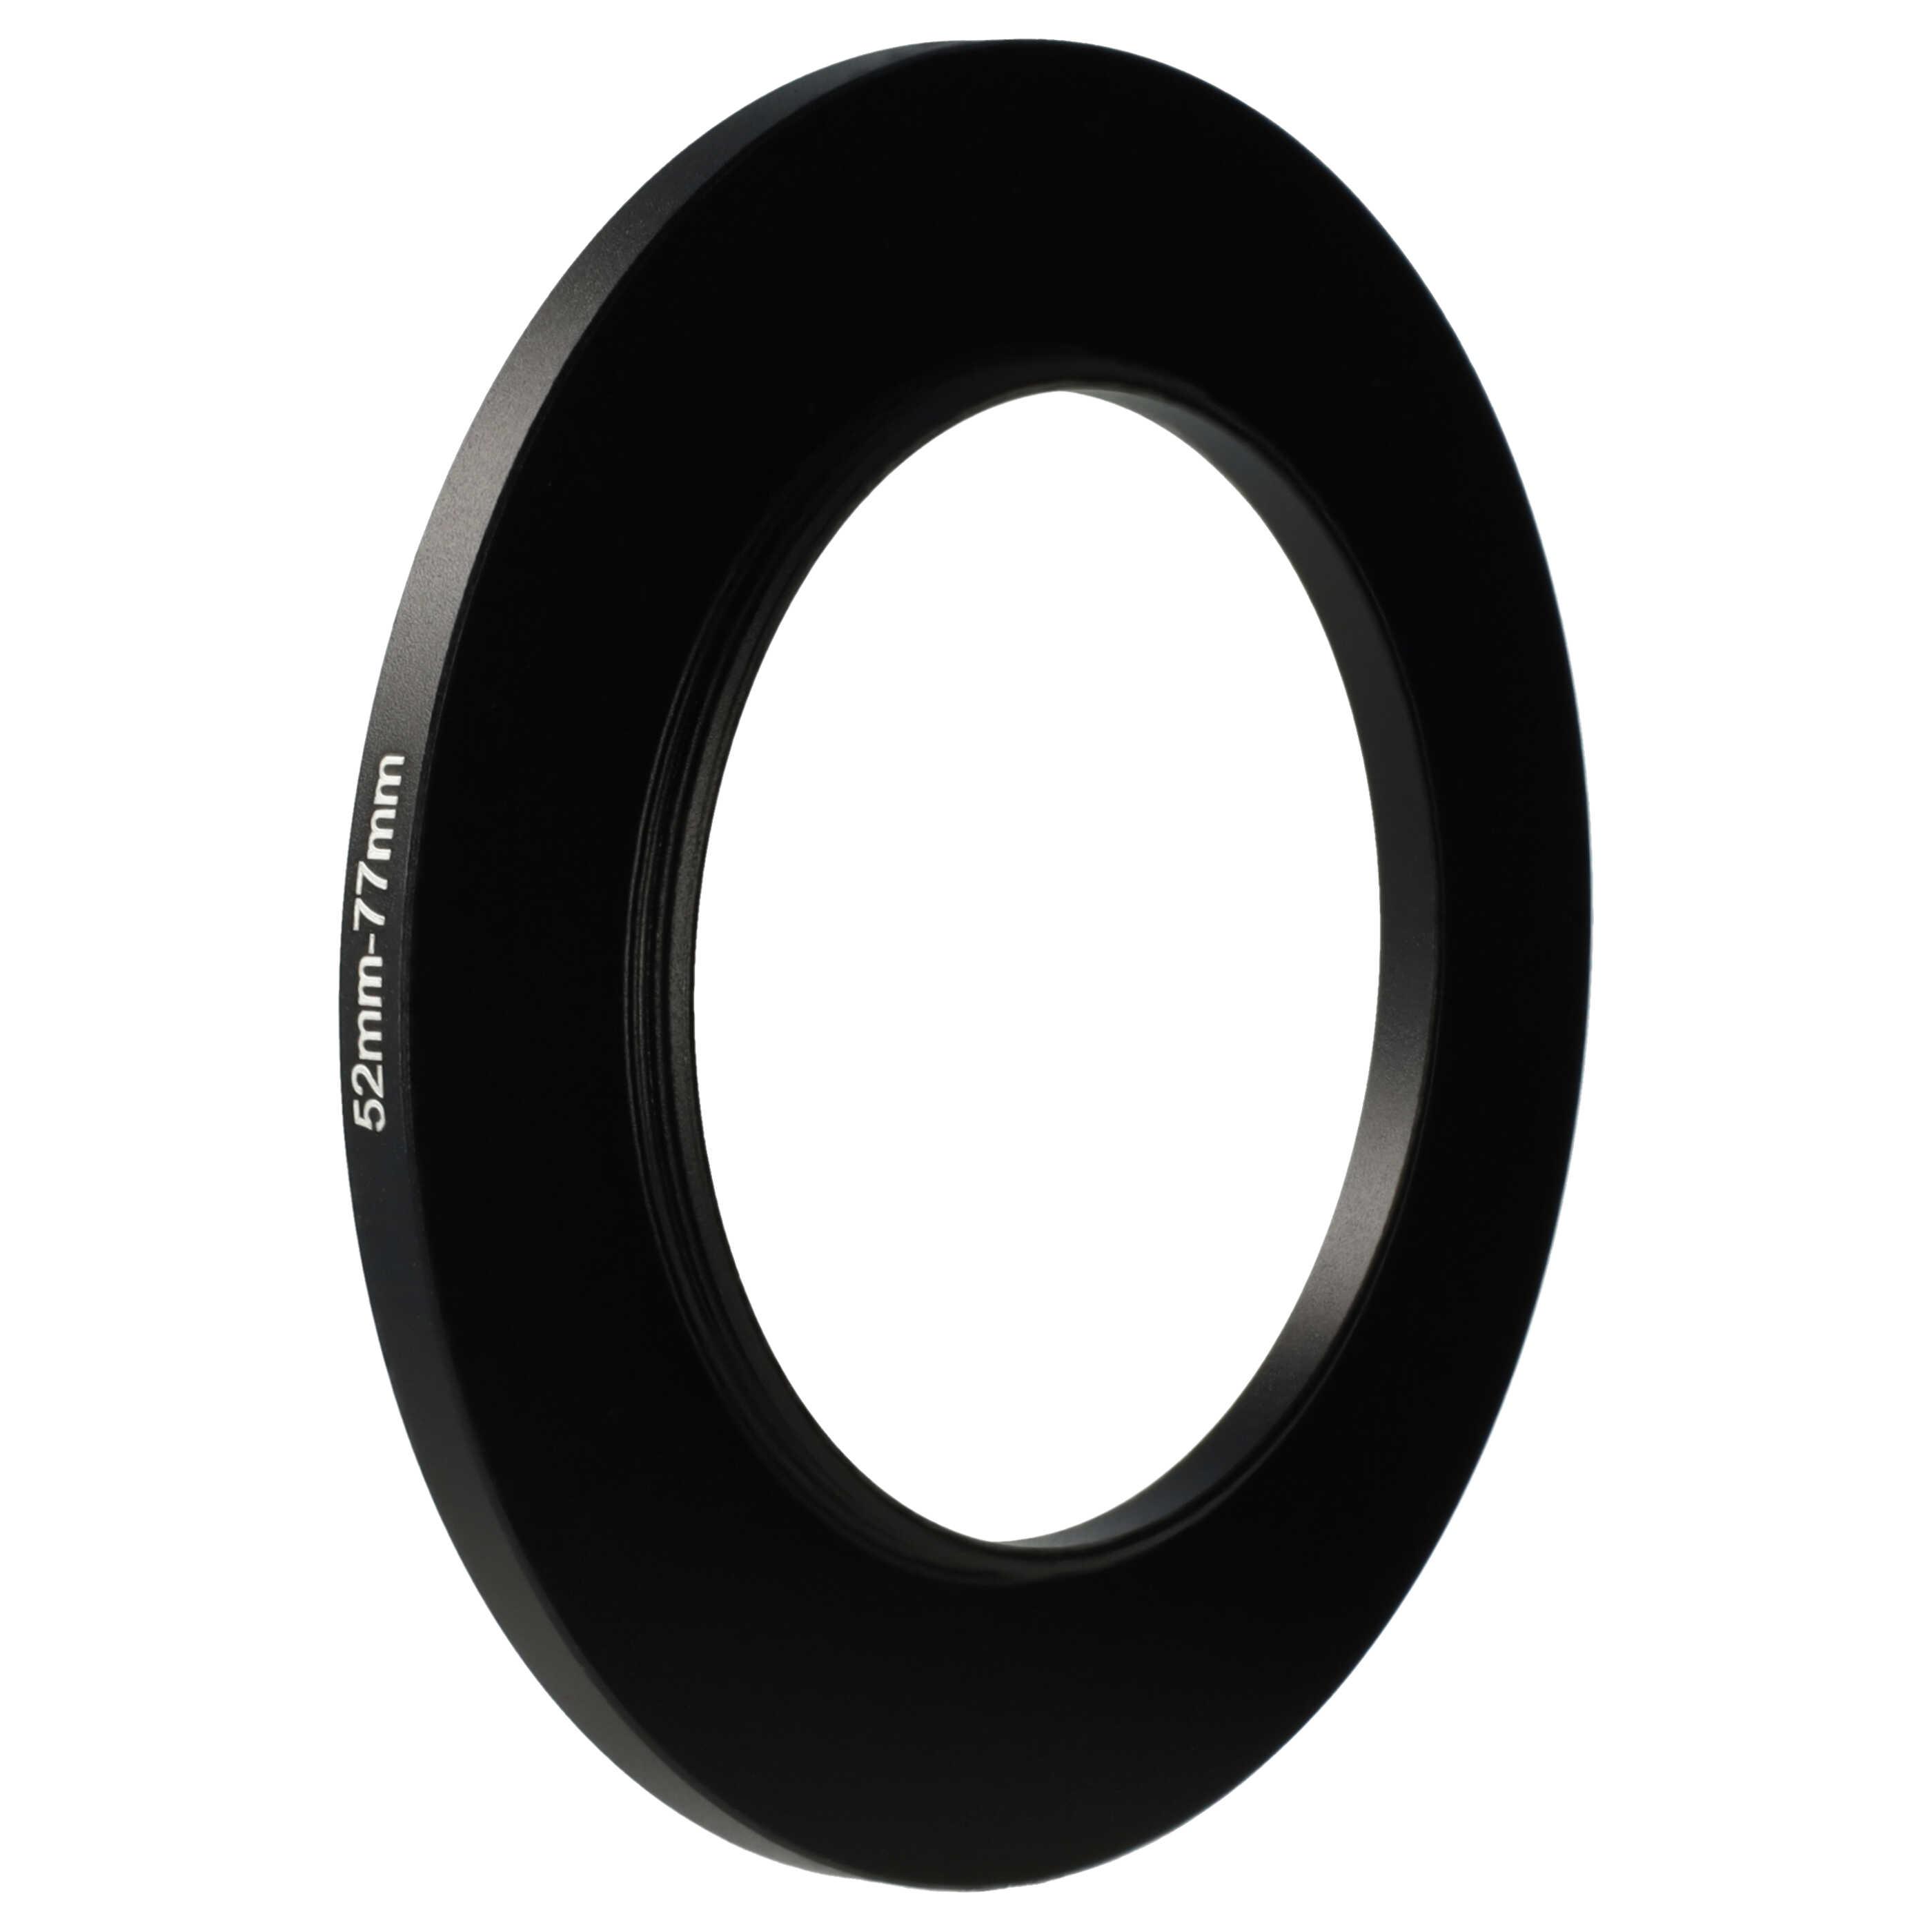 Step-Up Ring Adapter of 52 mm to 77 mmfor various Camera Lens - Filter Adapter